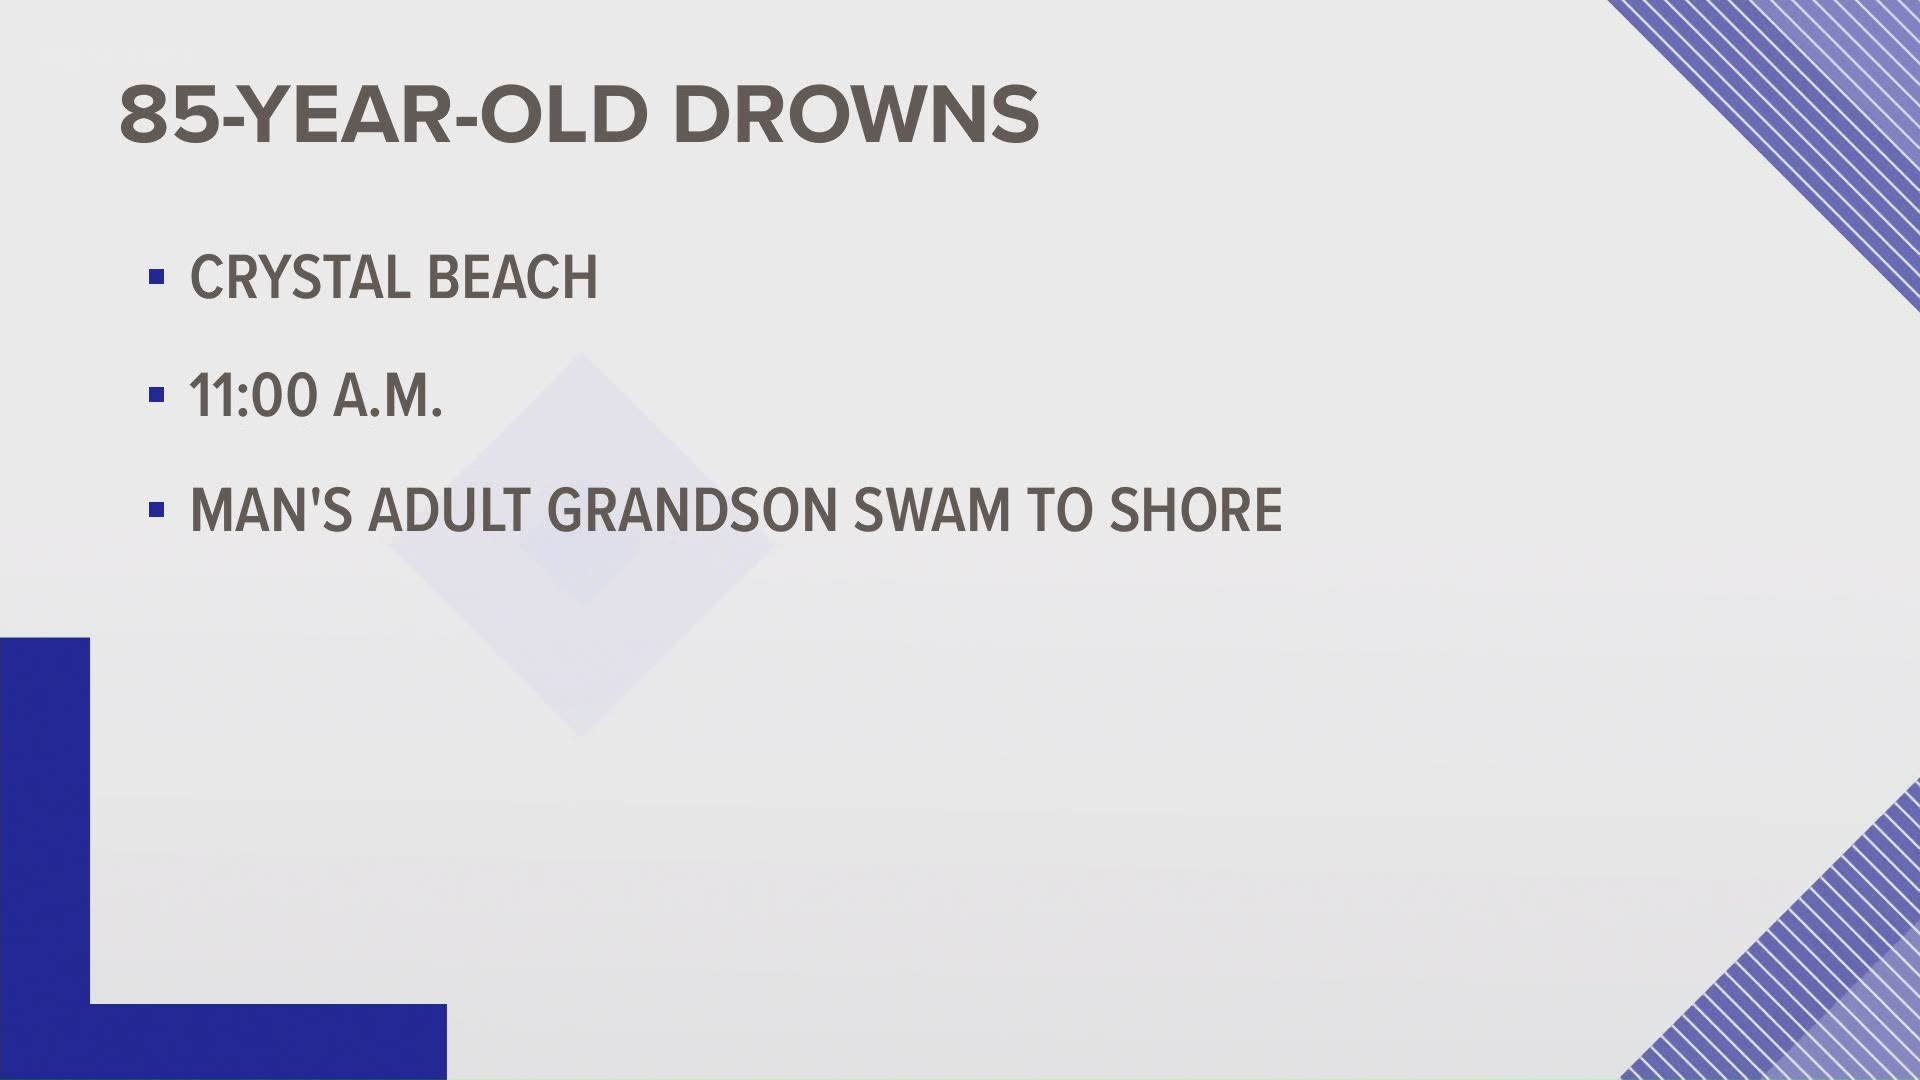 The U.S. Coast Guard says it happened around 11am. The man's adult grandson was also in the boat and swam to shore.